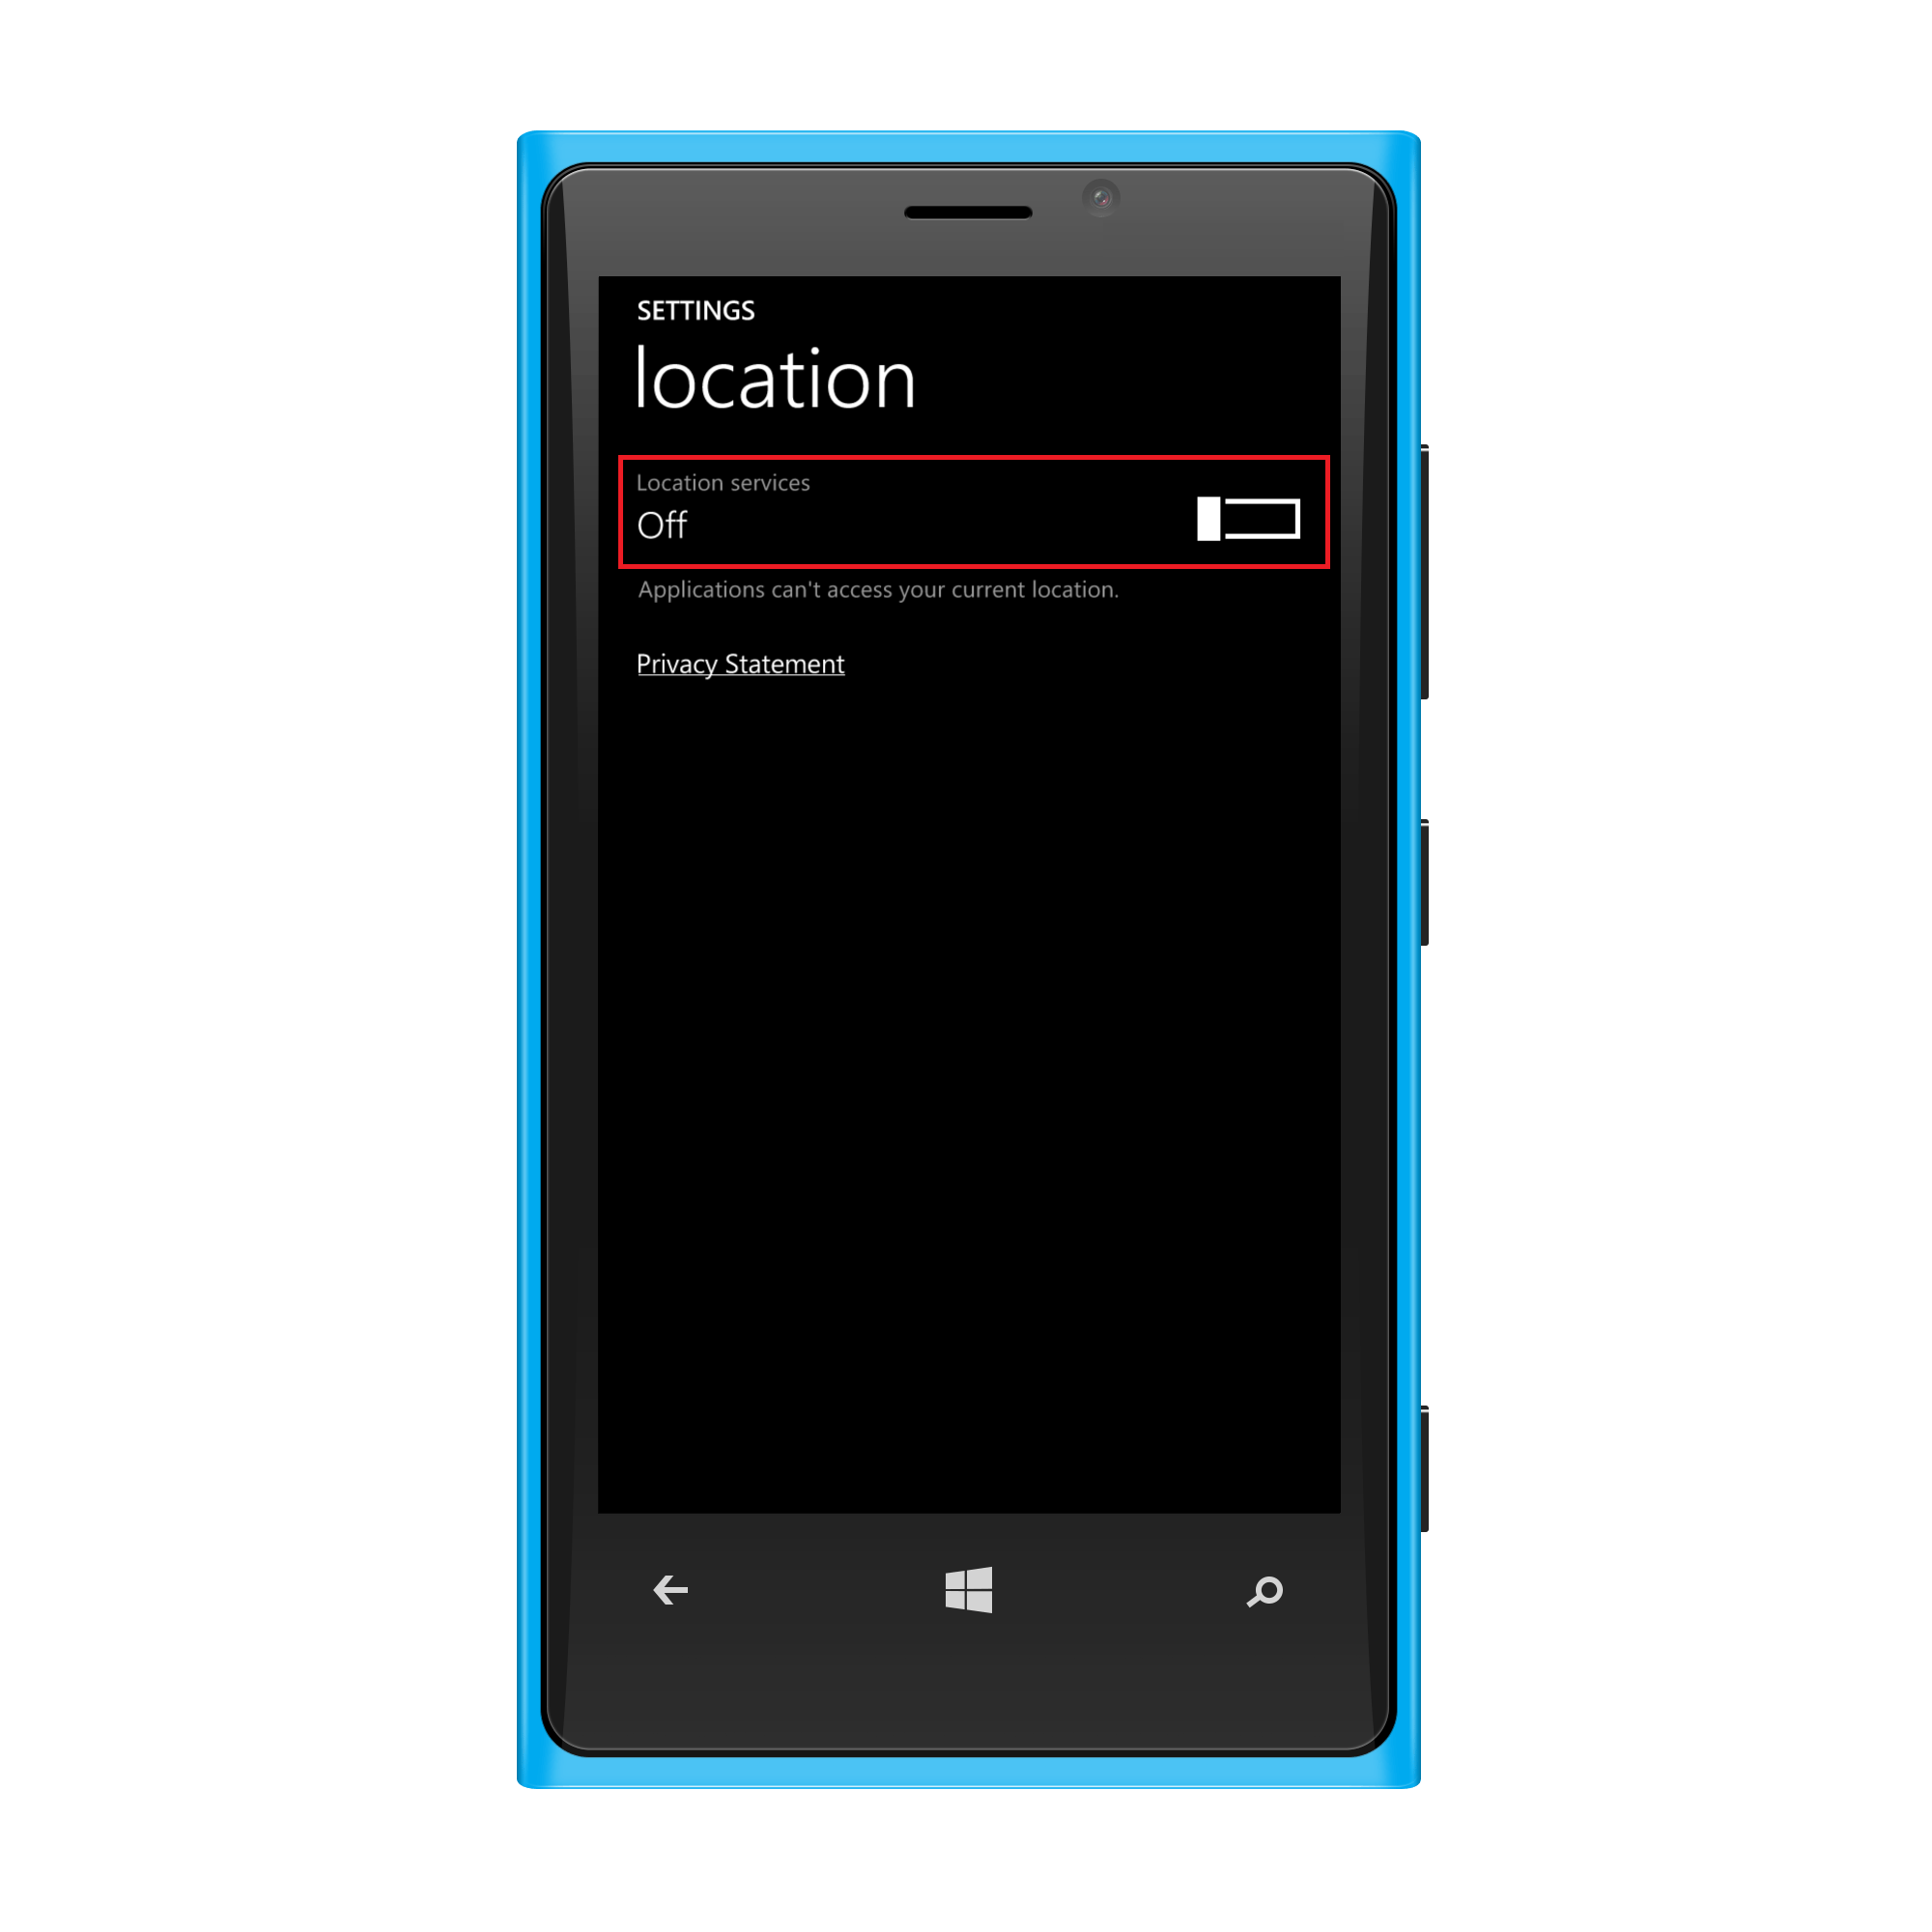 Enabling Location Services for Geotracking Windows phone